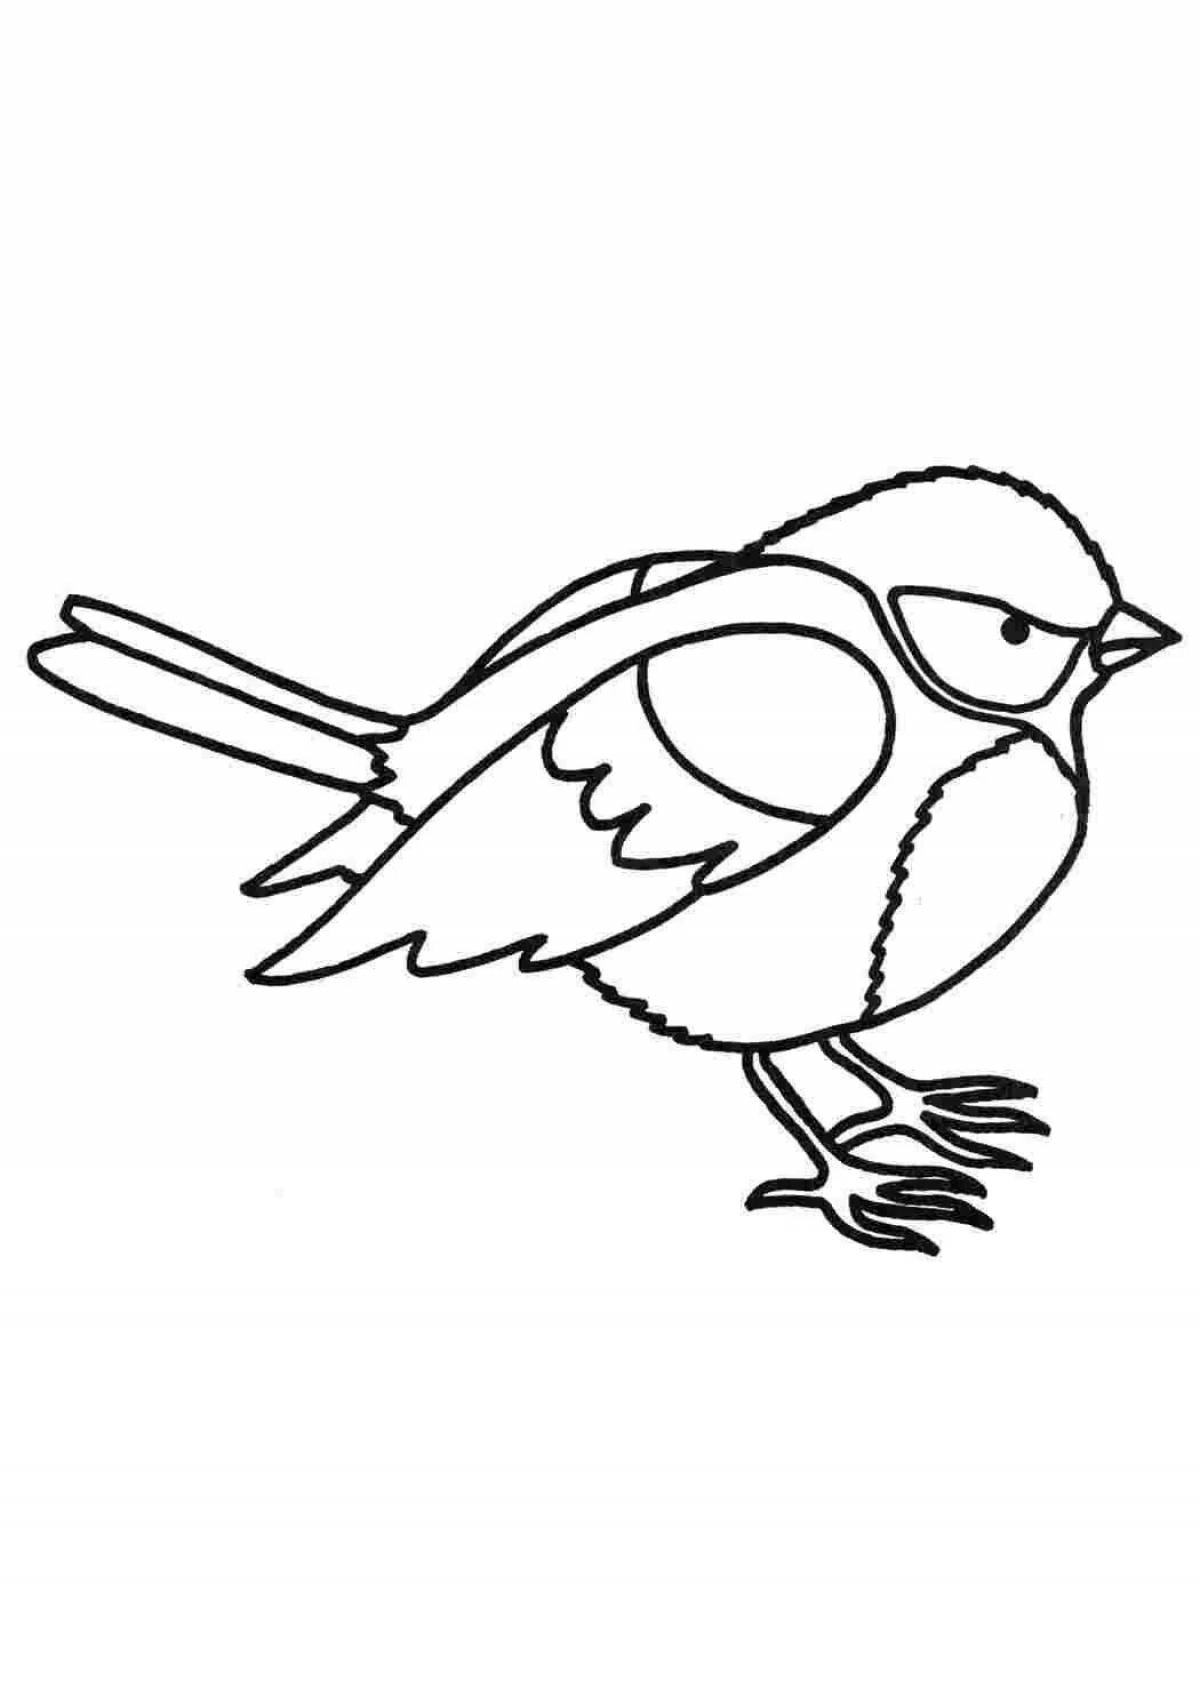 Awesome bird coloring pages for kids